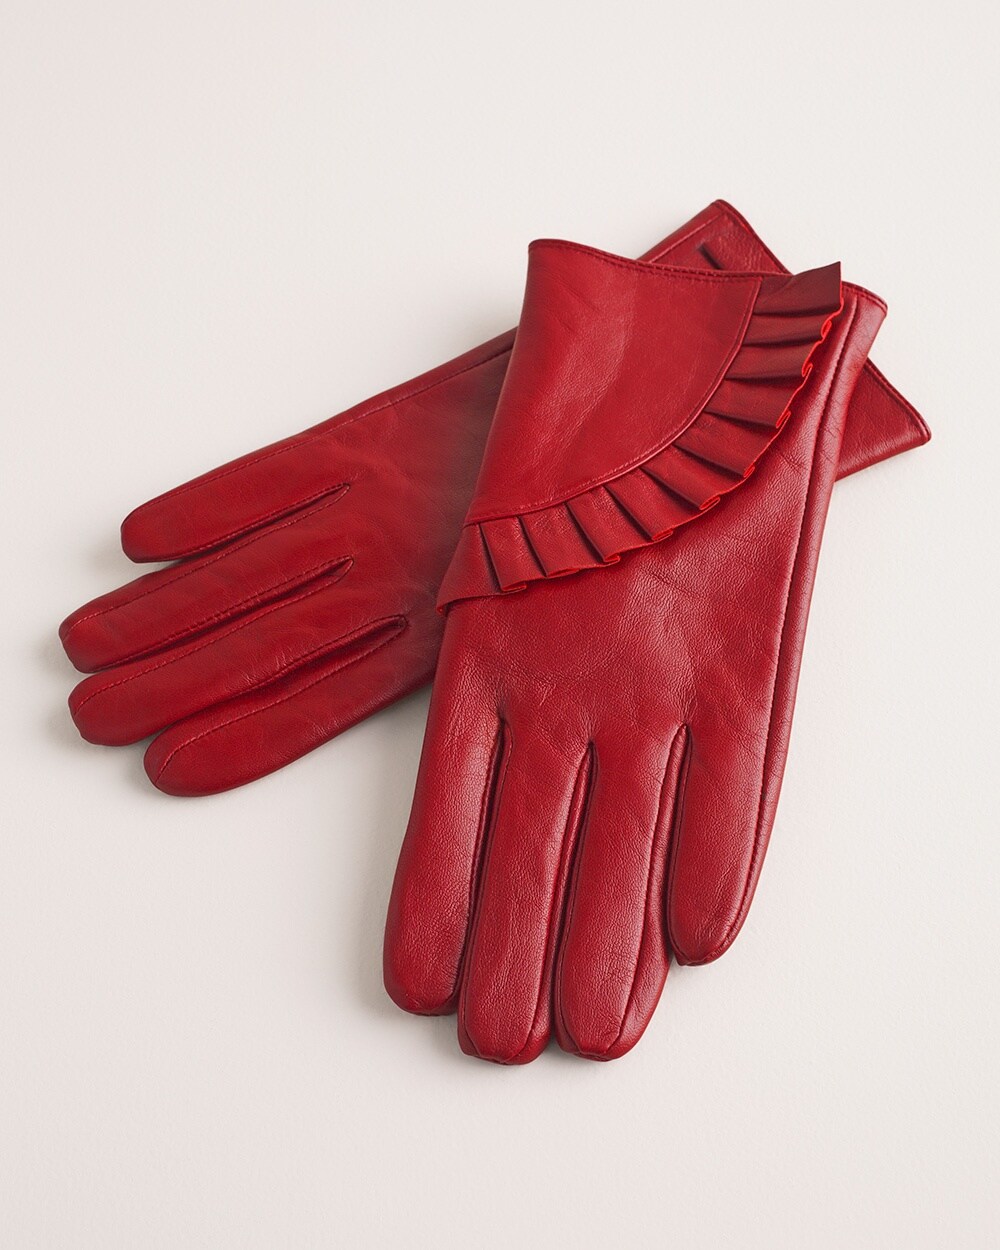 Ruffle-Trimmed Leather Gloves with Technology Finger